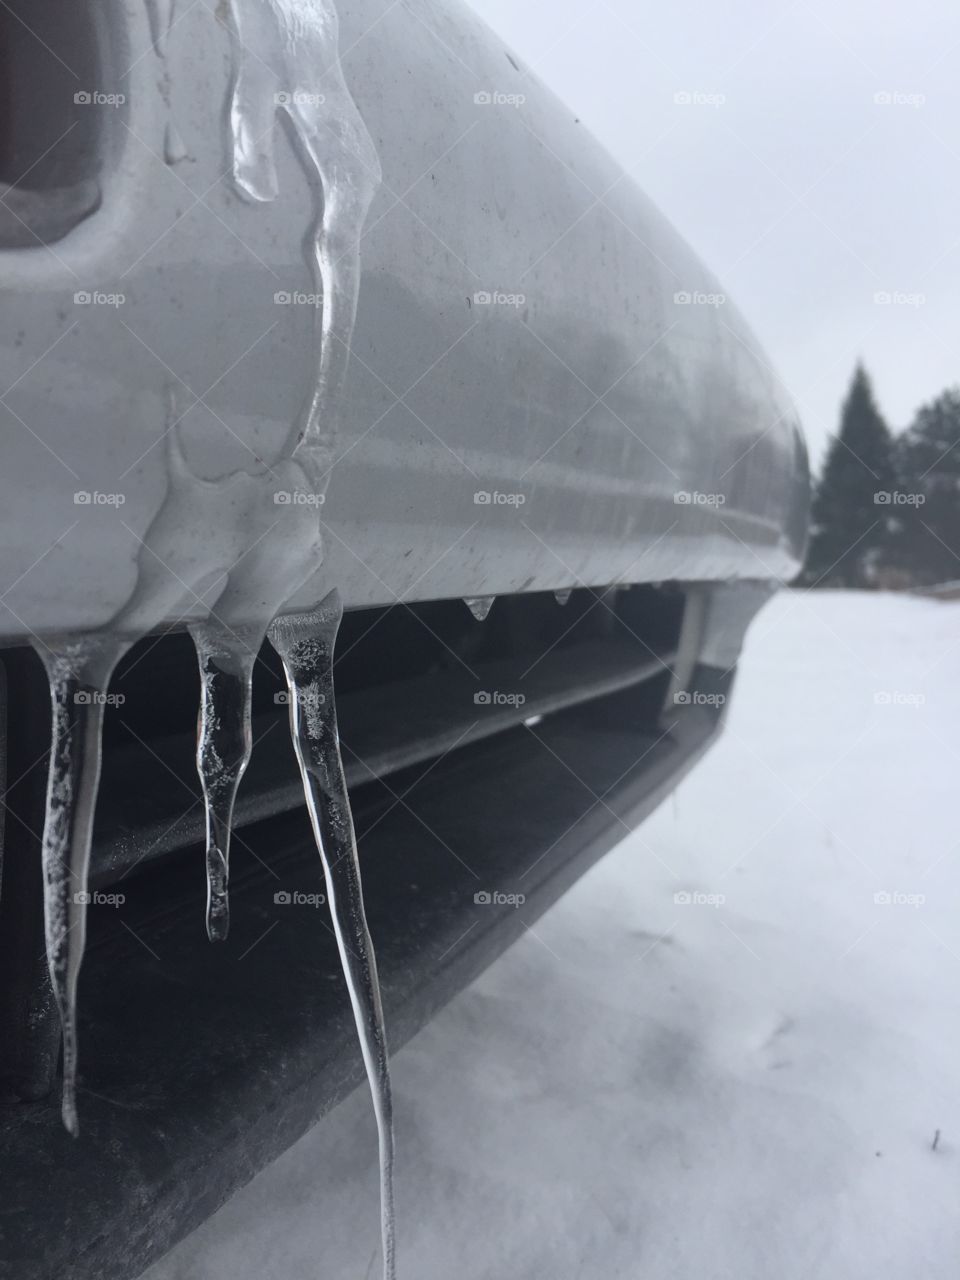 Icicles on my 300zx in winter